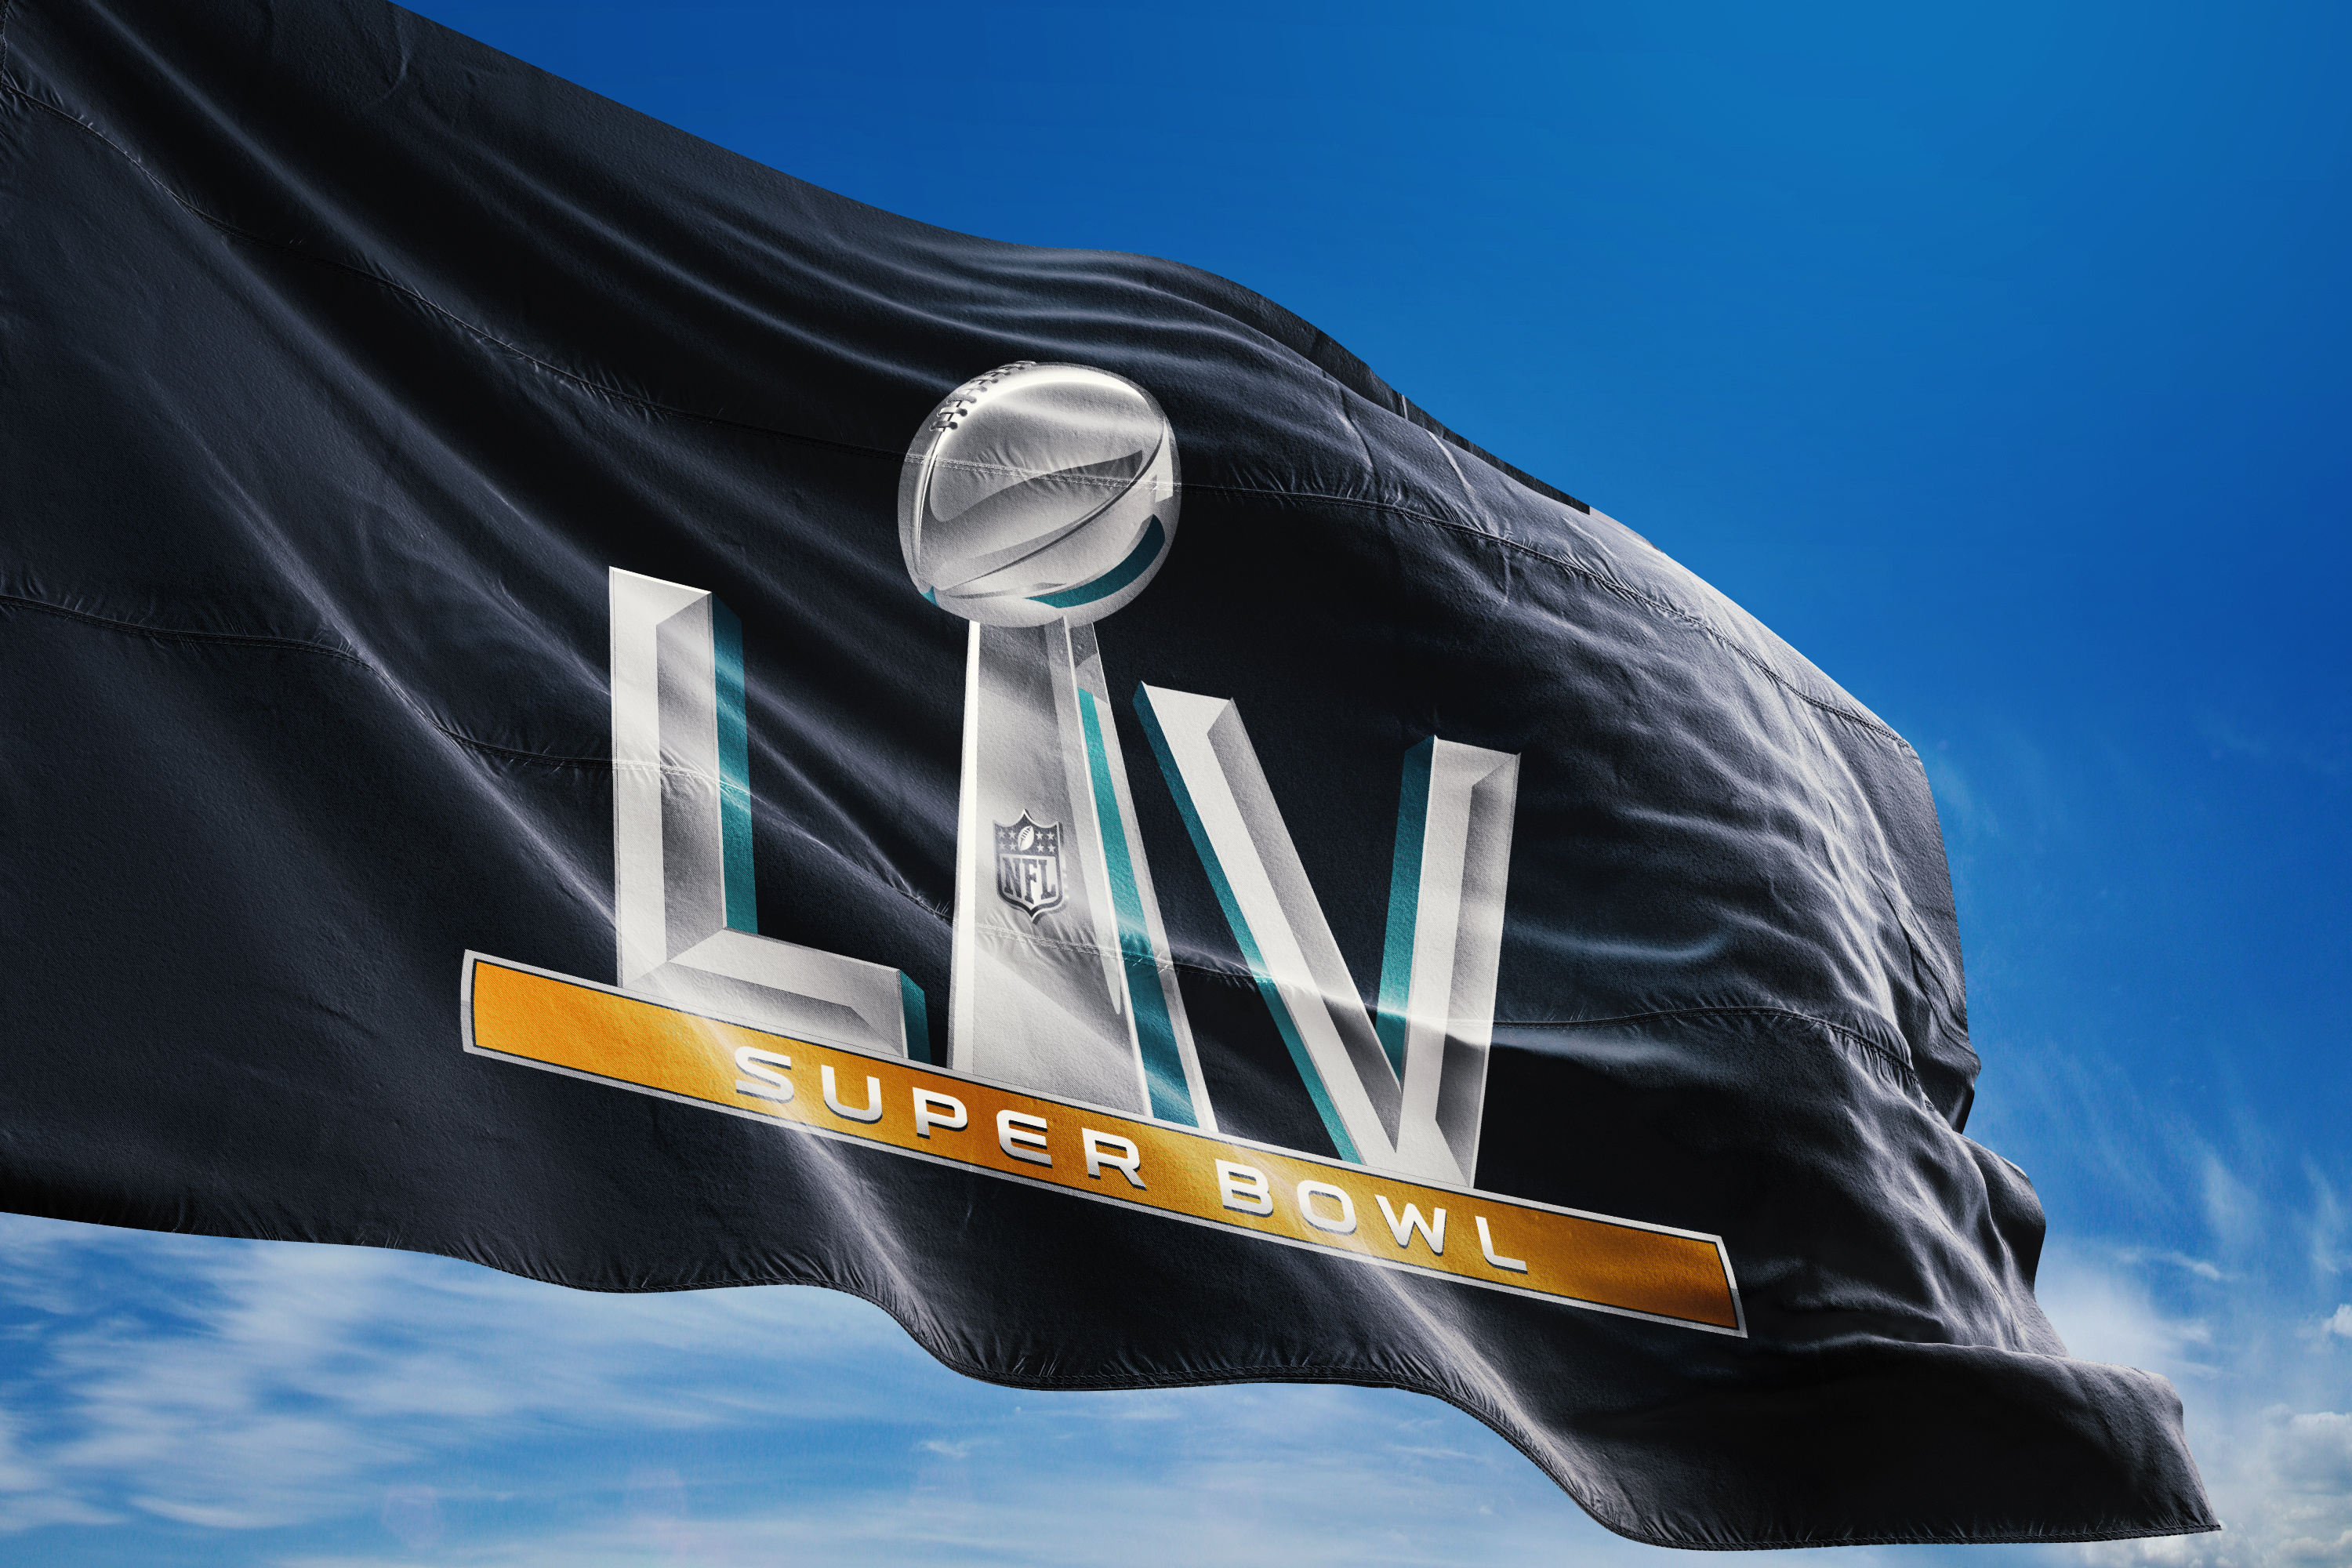 Hospitality spend sets 'new records' at Super Bowl LV